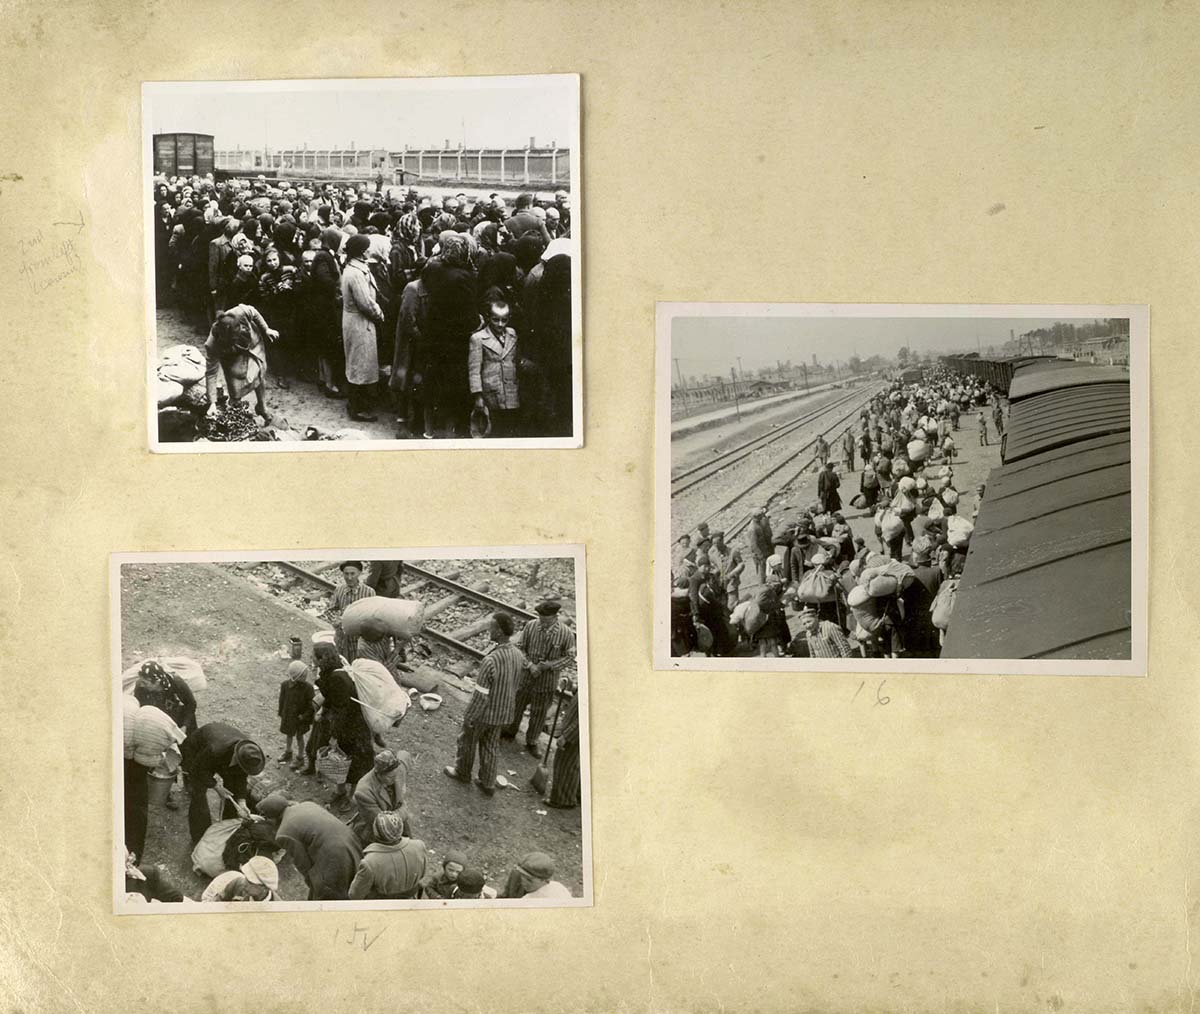 Jews arriving at the camp before undergoing the selection process. Mass scenes like this were an almost daily occurrence in the summer of 1944, when the murder of the Jews of Hungary was at its height